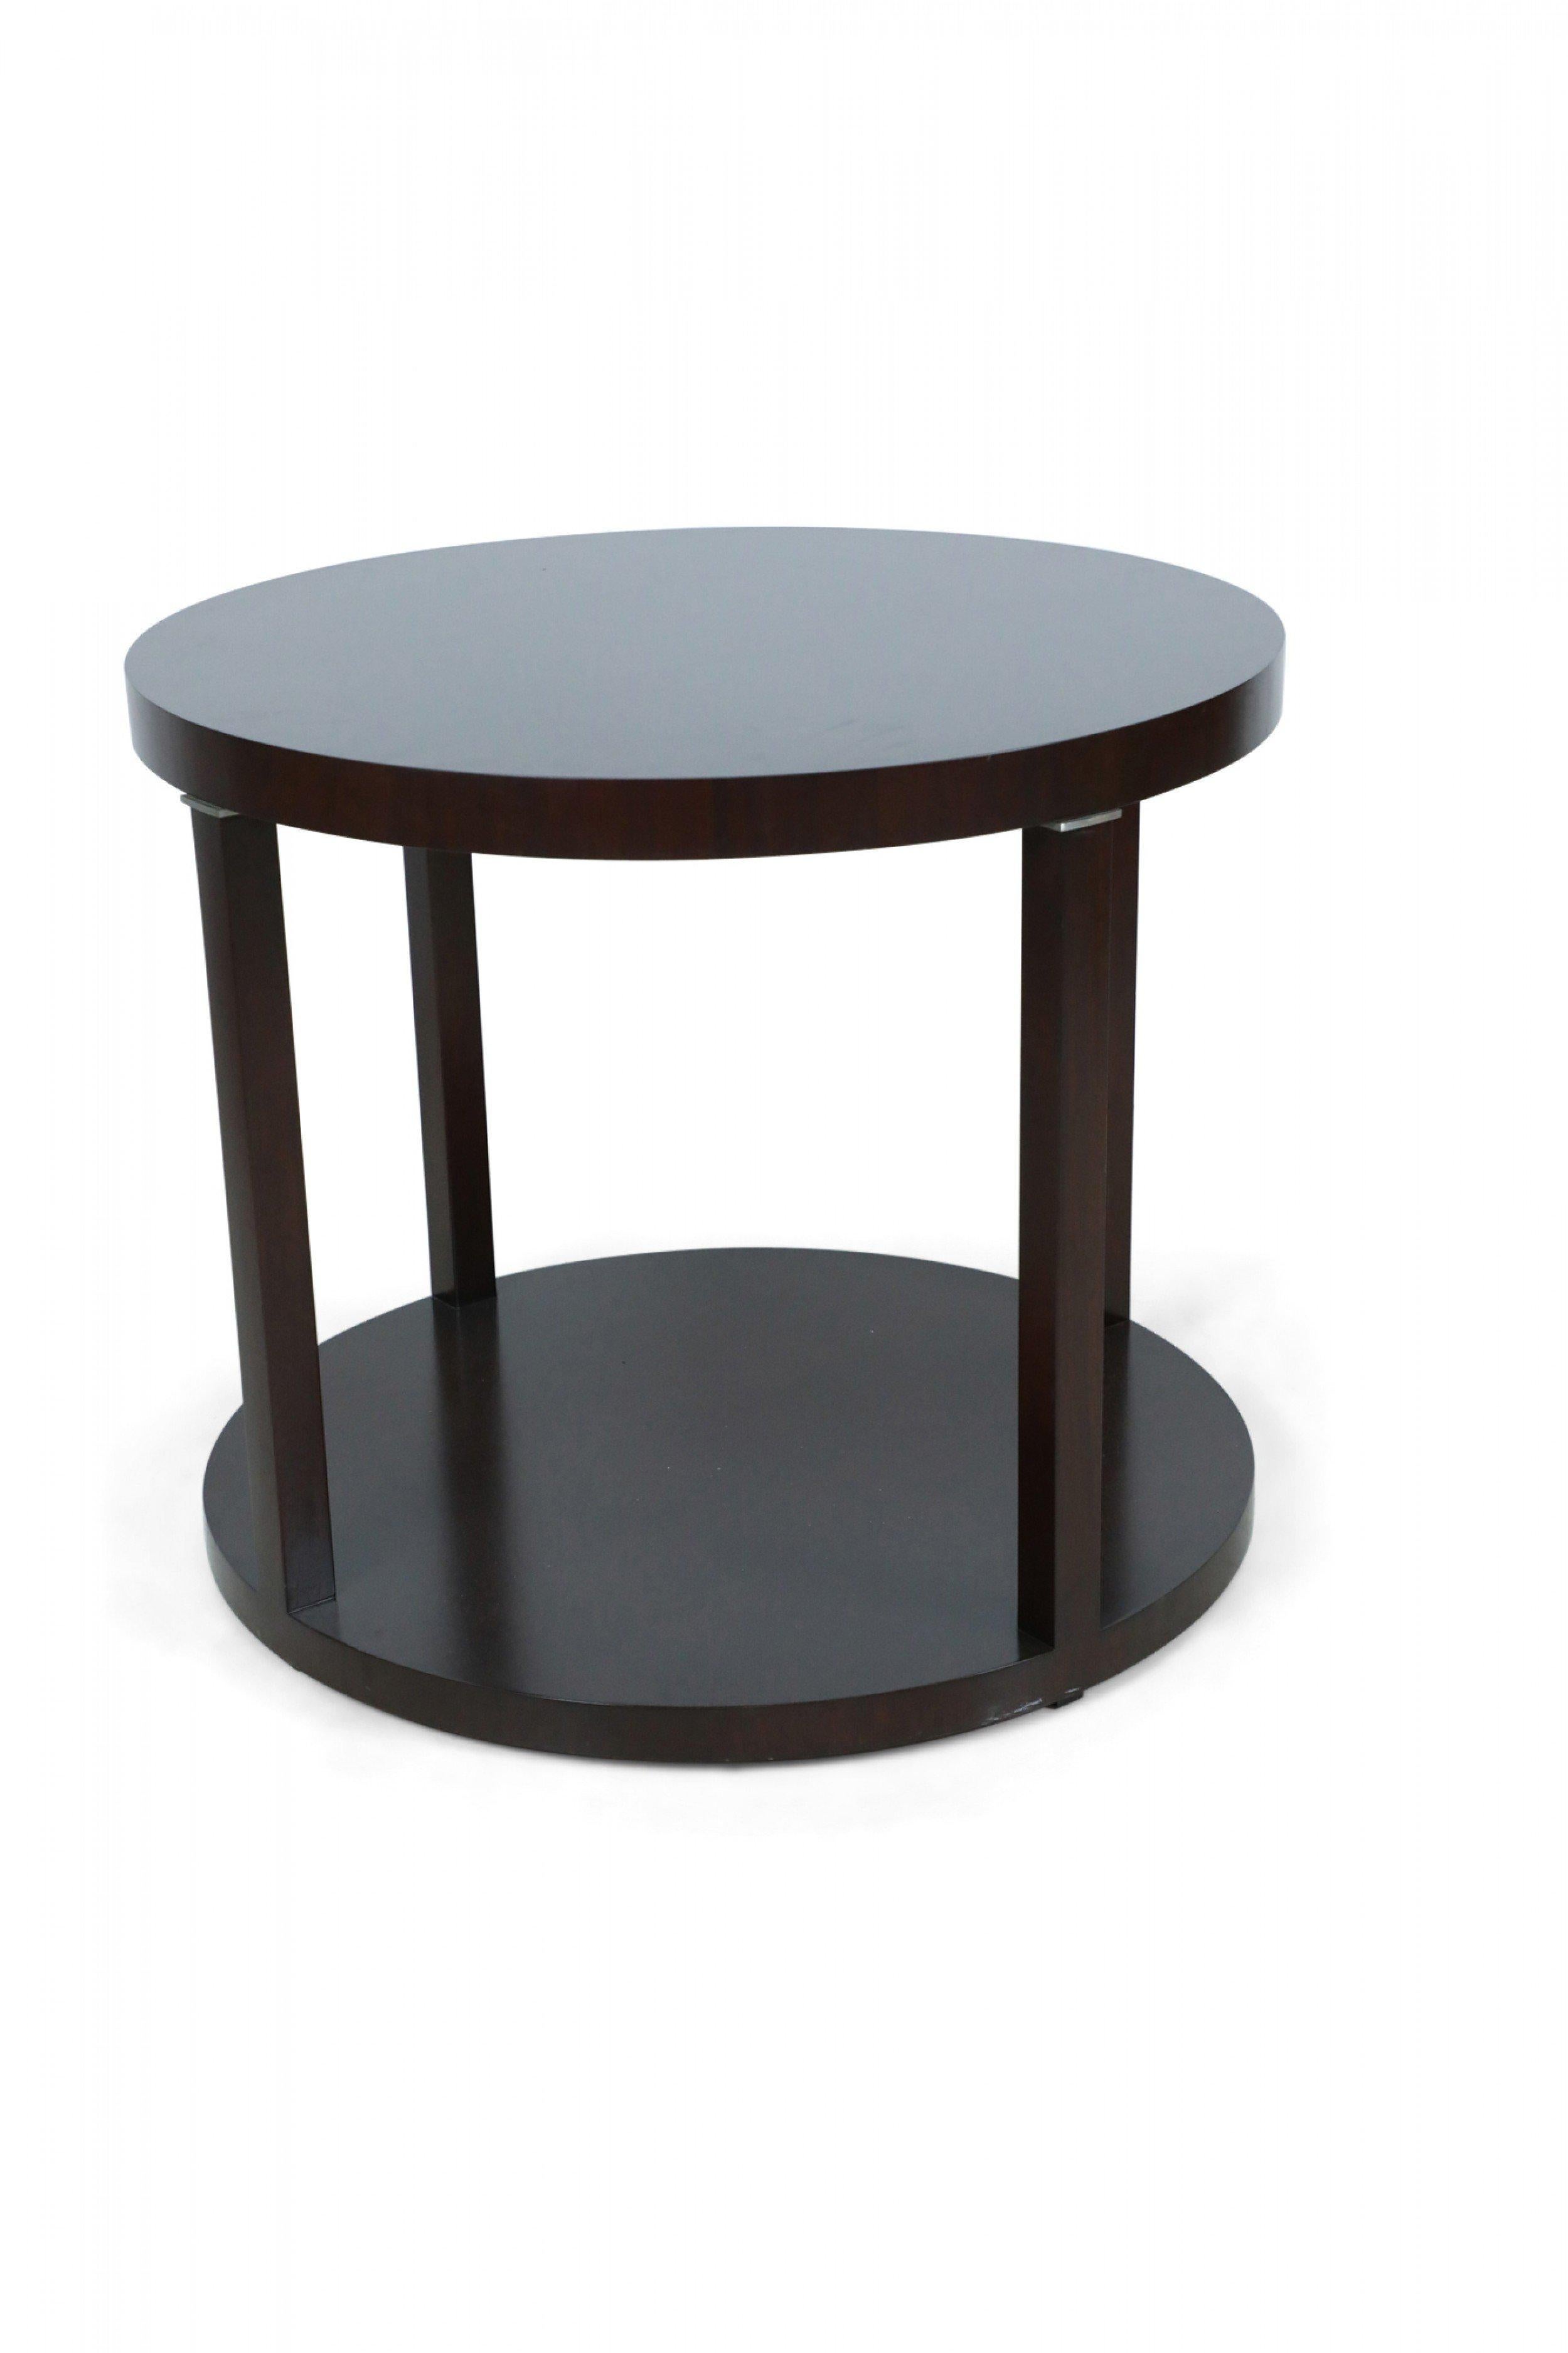 American Modern Round Mahogany Center Table with Platform Base For Sale